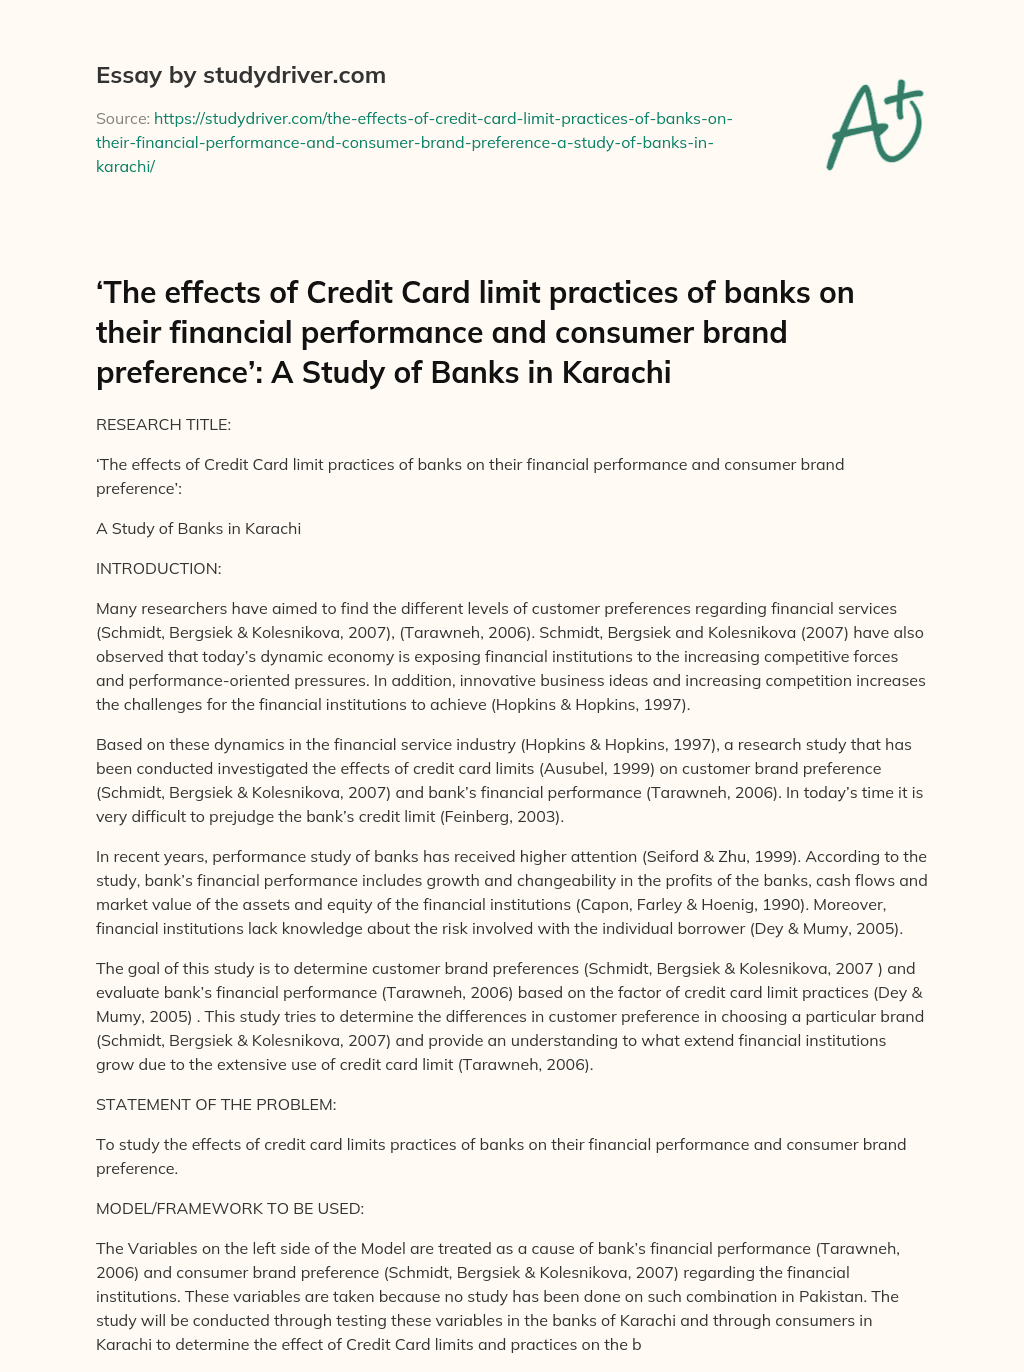 ‘The Effects of Credit Card Limit Practices of Banks on their Financial Performance and Consumer Brand Preference’: a Study of Banks in Karachi essay